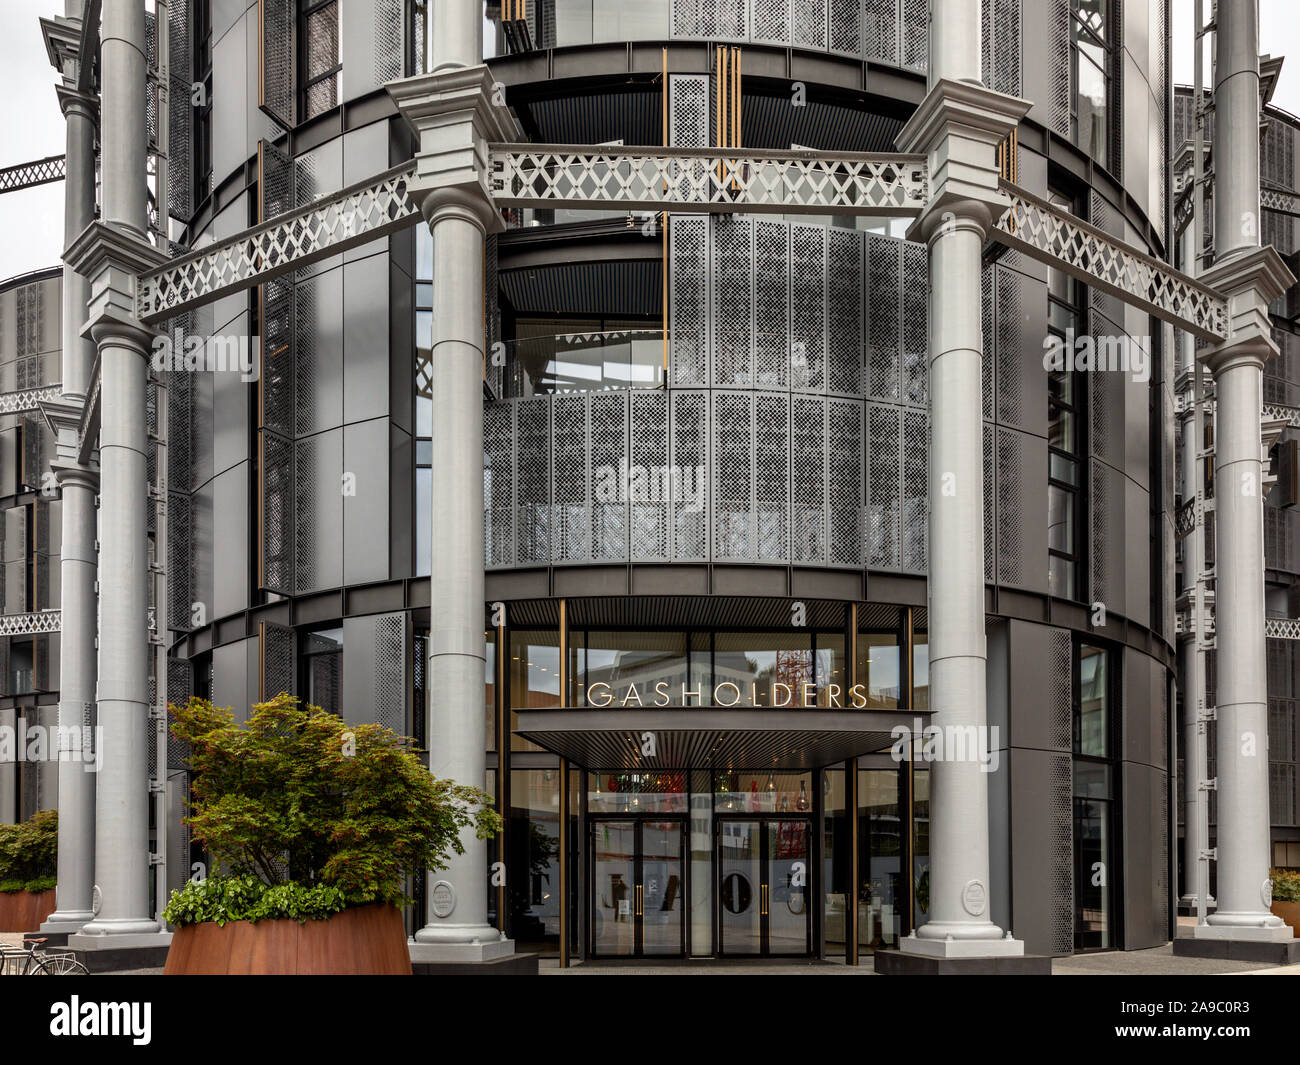 Exterior view of entrance to Gasholders, King's Cross. Apartments and penthouses built inside the listed framework of former gasholders. London, UK Stock Photo